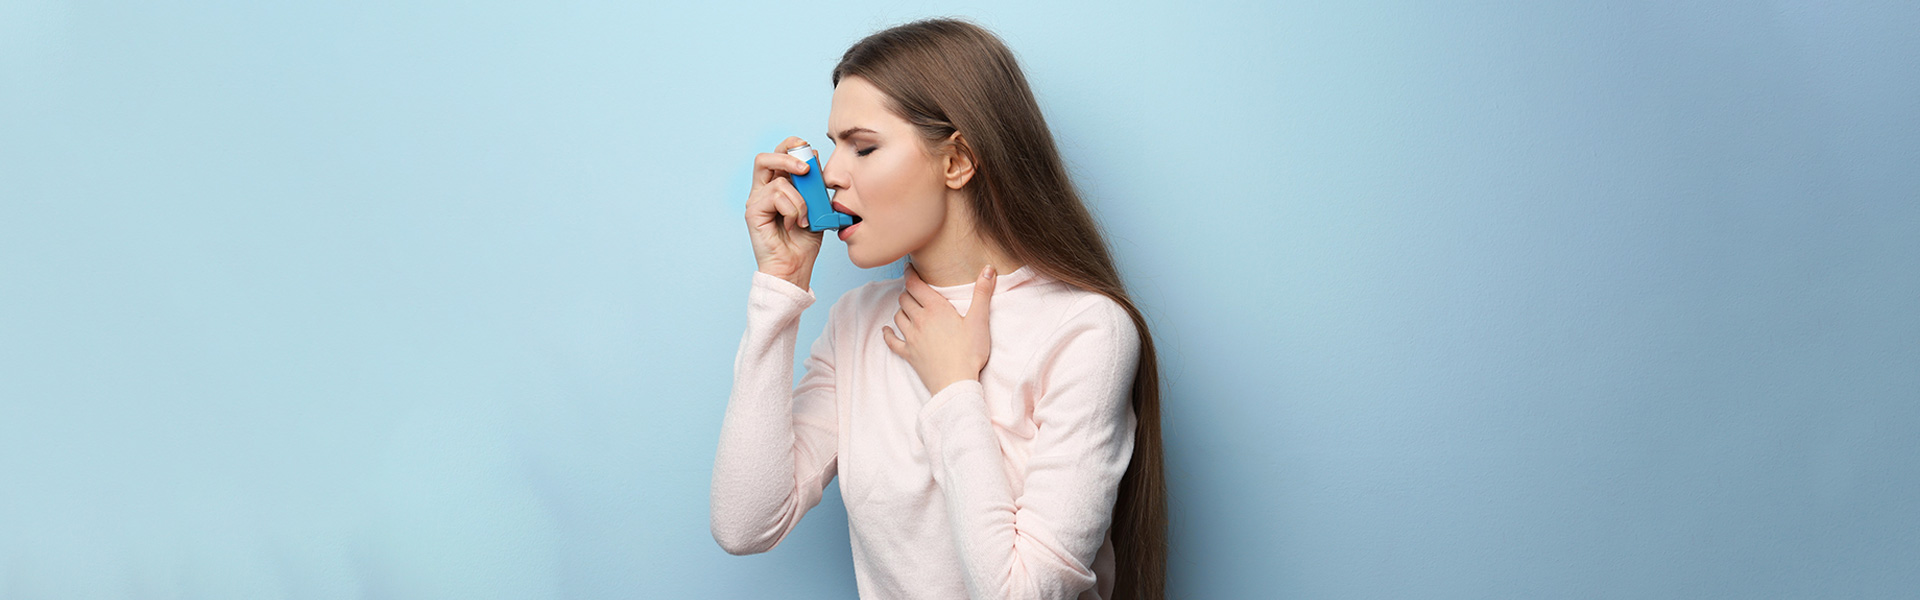 What’s an Asthma Attack? Here’ All You Need to Know